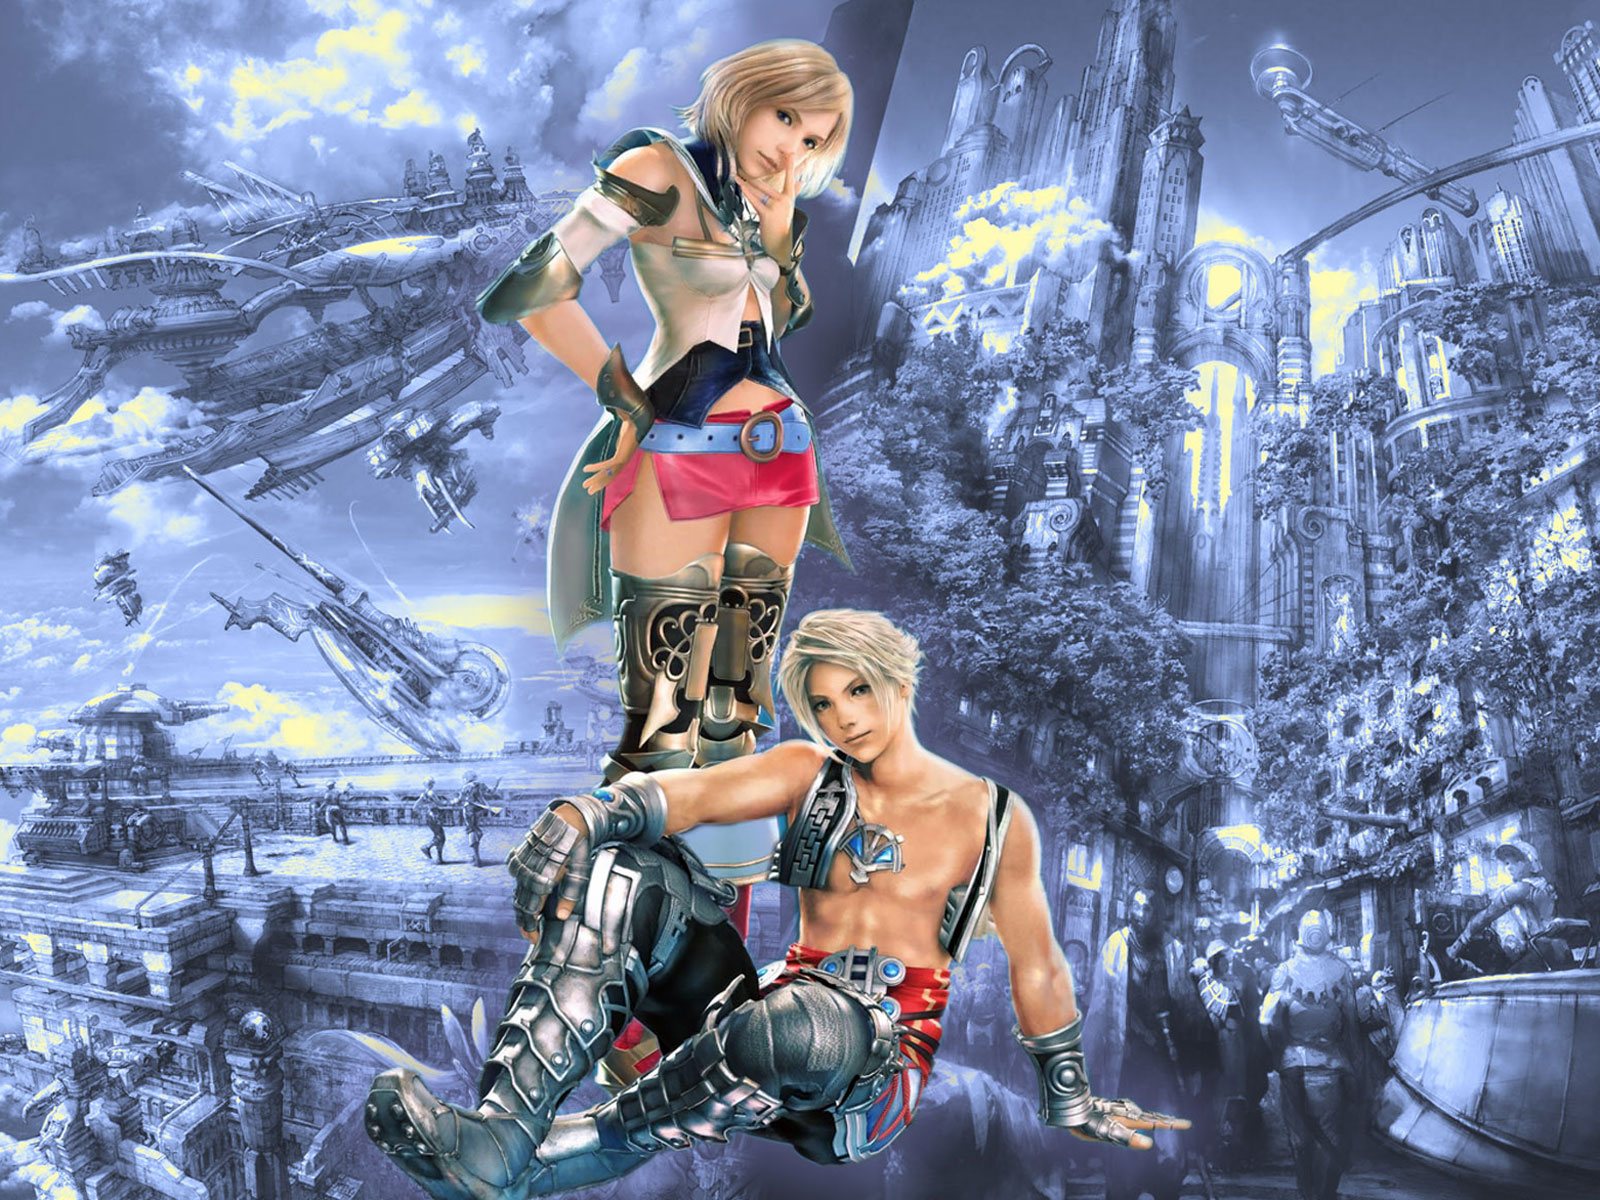 Vaan and Ashe, fierce warriors from Final Fantasy XII, ready to embark on an epic adventure.